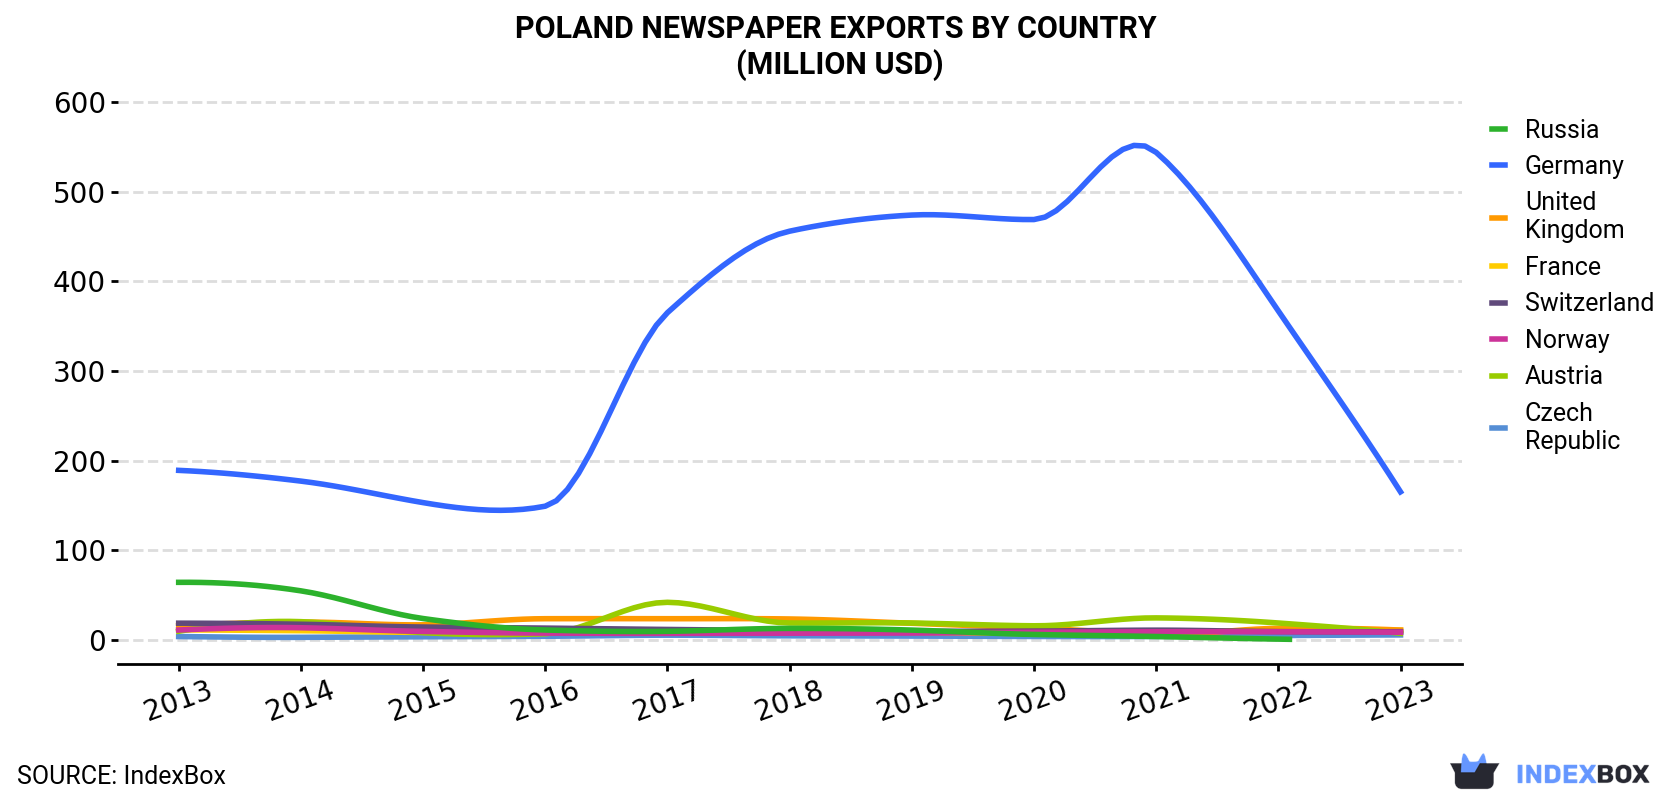 Poland Newspaper Exports By Country (Million USD)